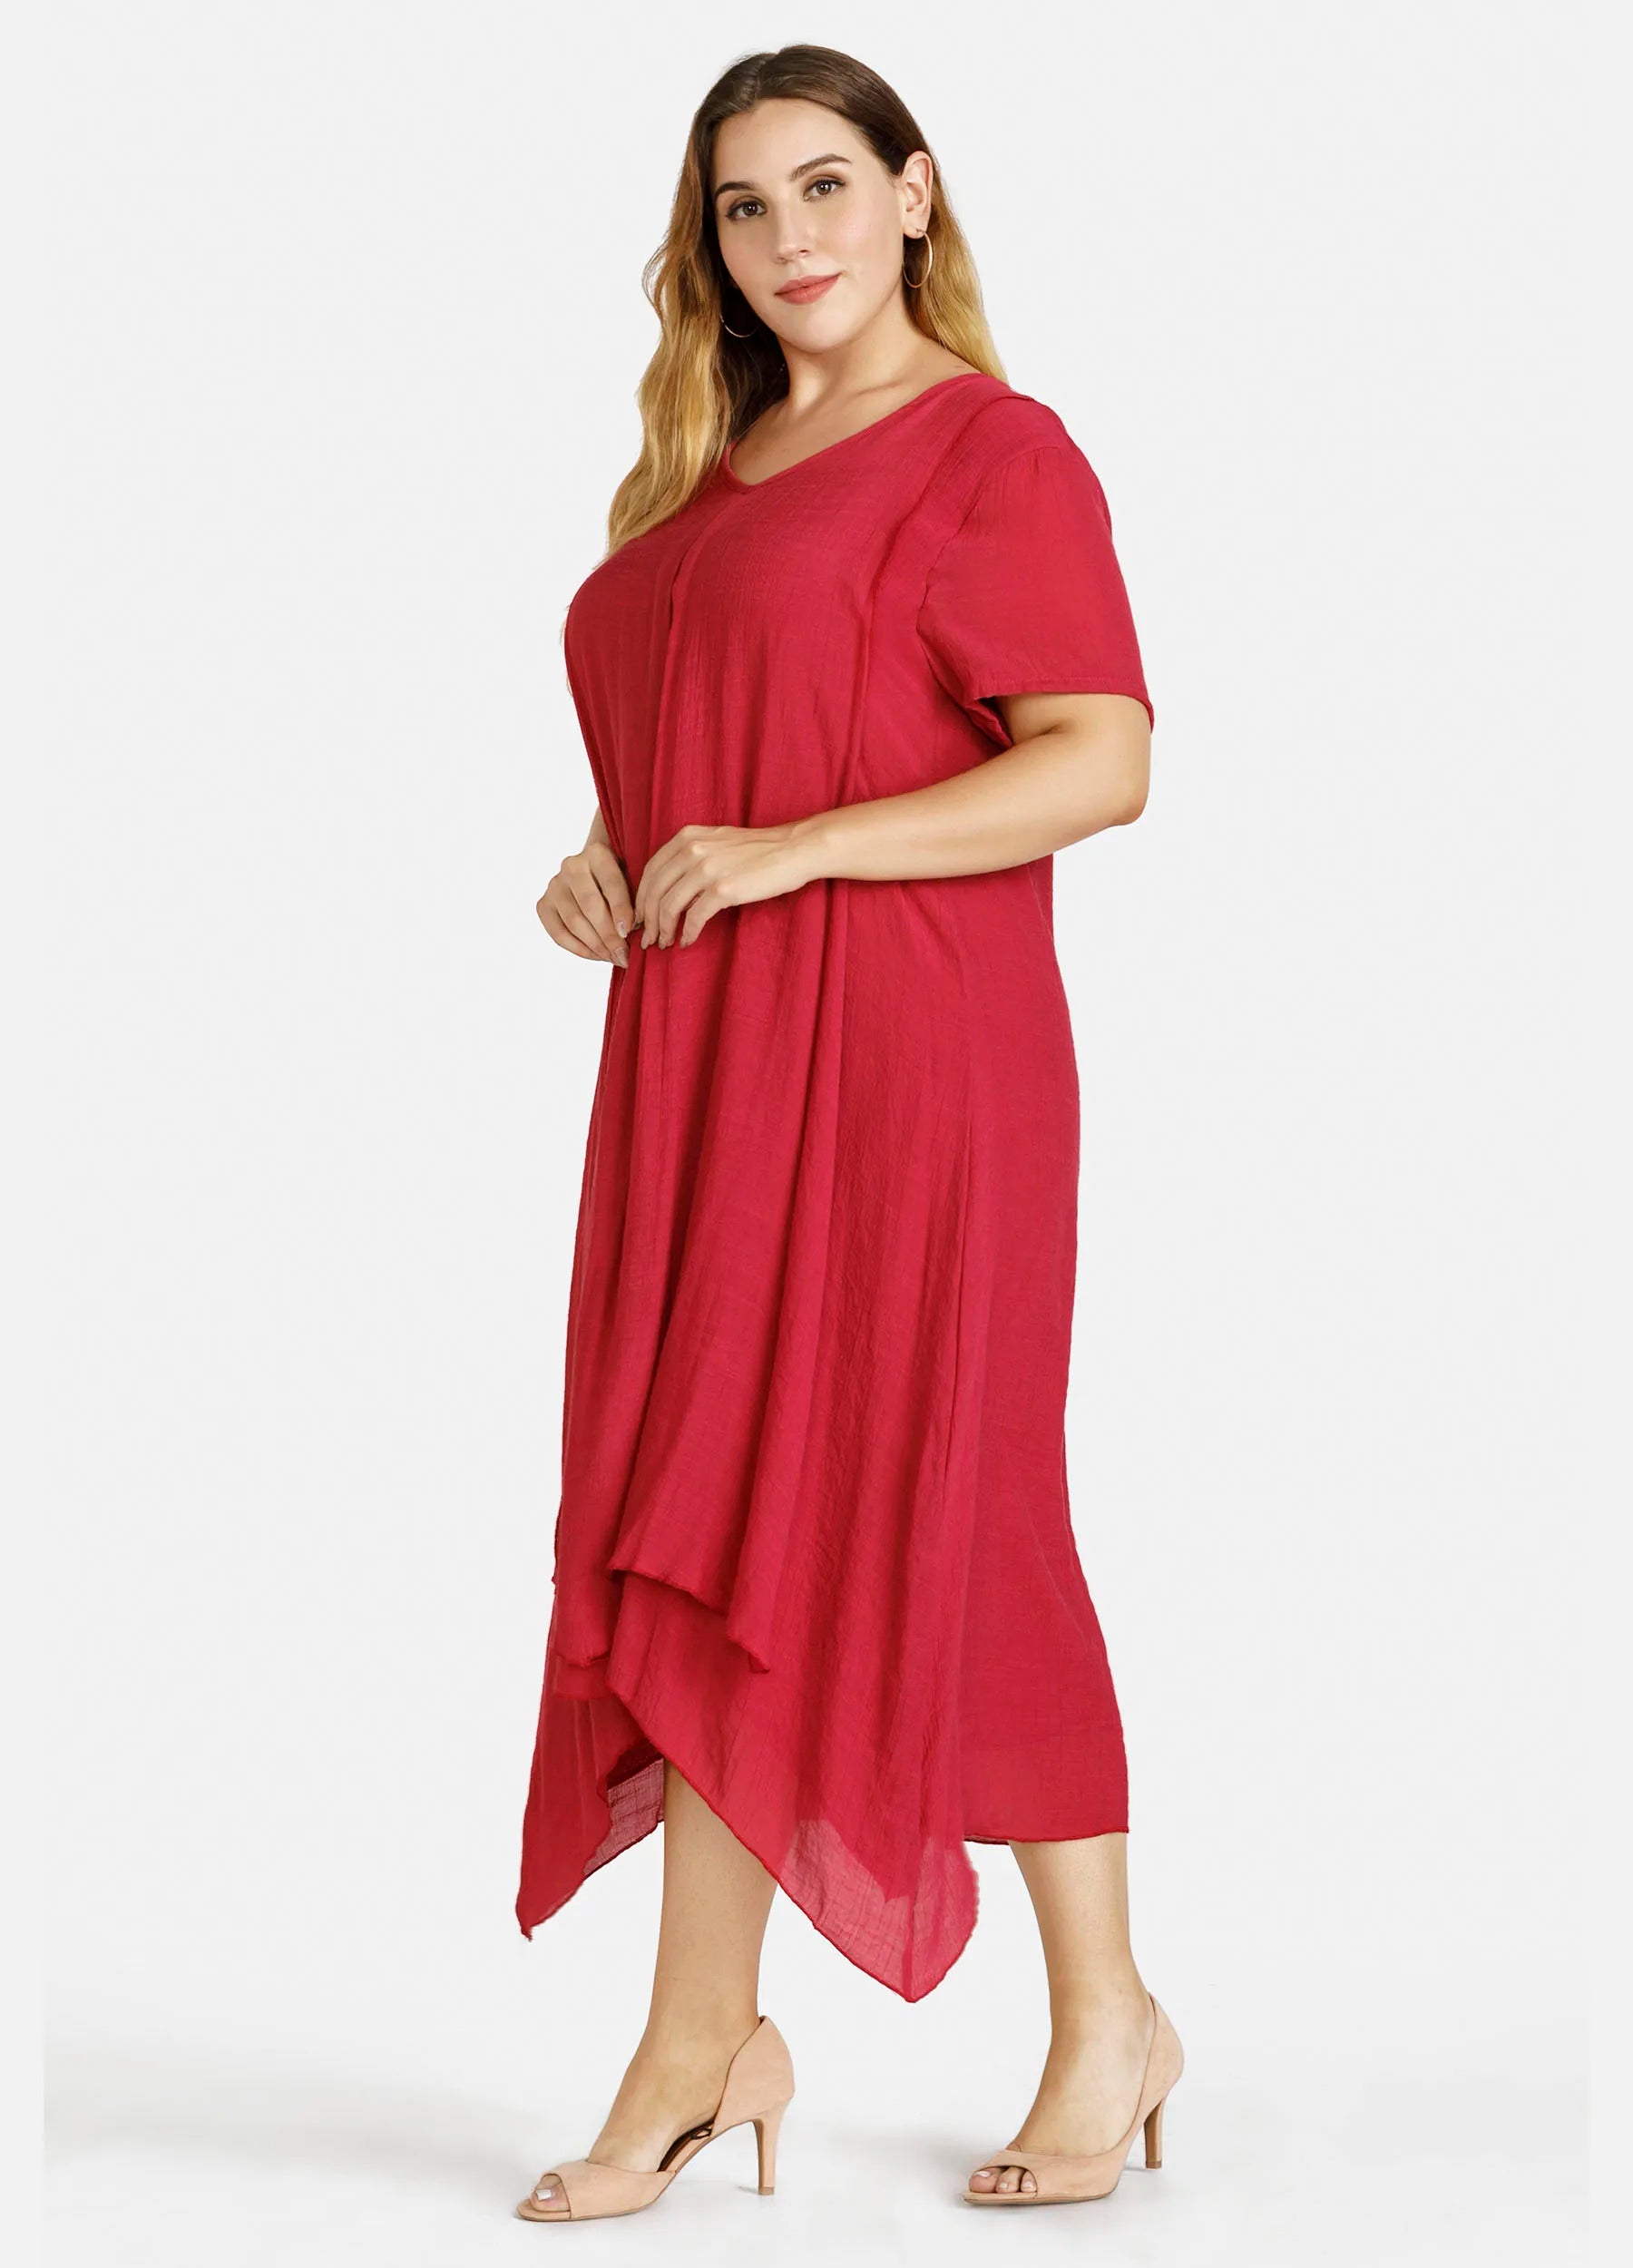 MECALA Women's Solid Short Sleeve Midi Dress-Red side view